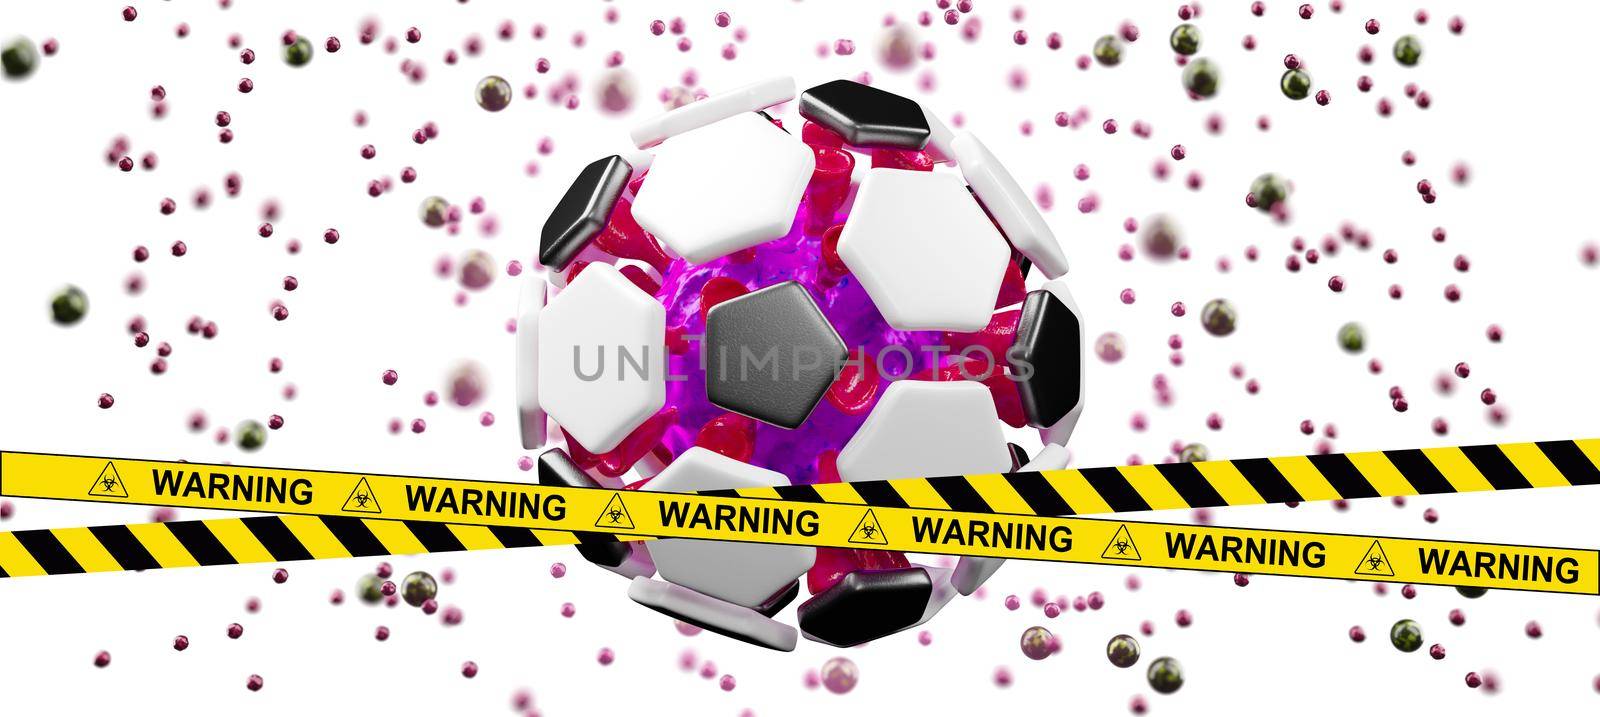 Soccer events through the corona virus time by Taut